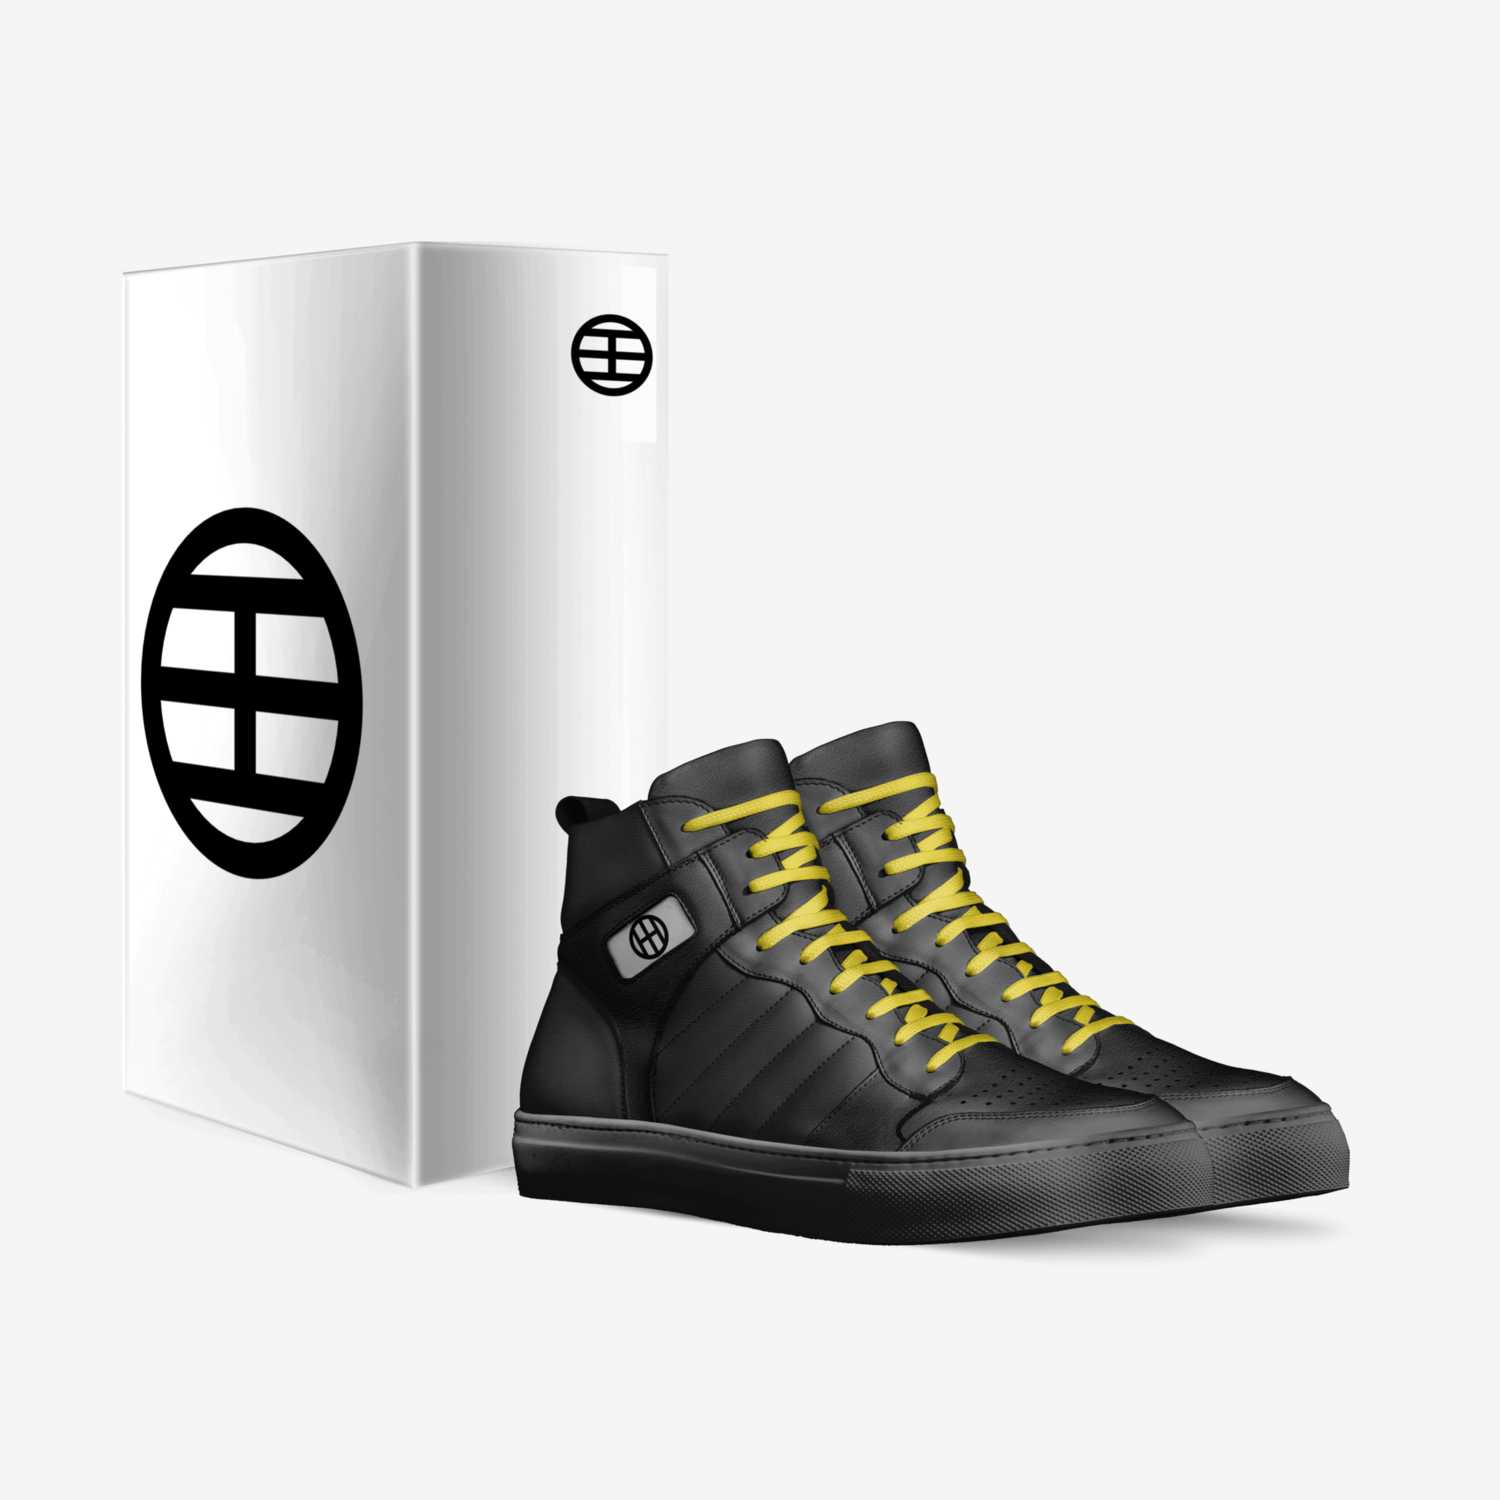 HH b&g custom made in Italy shoes by Nate Hall | Box view